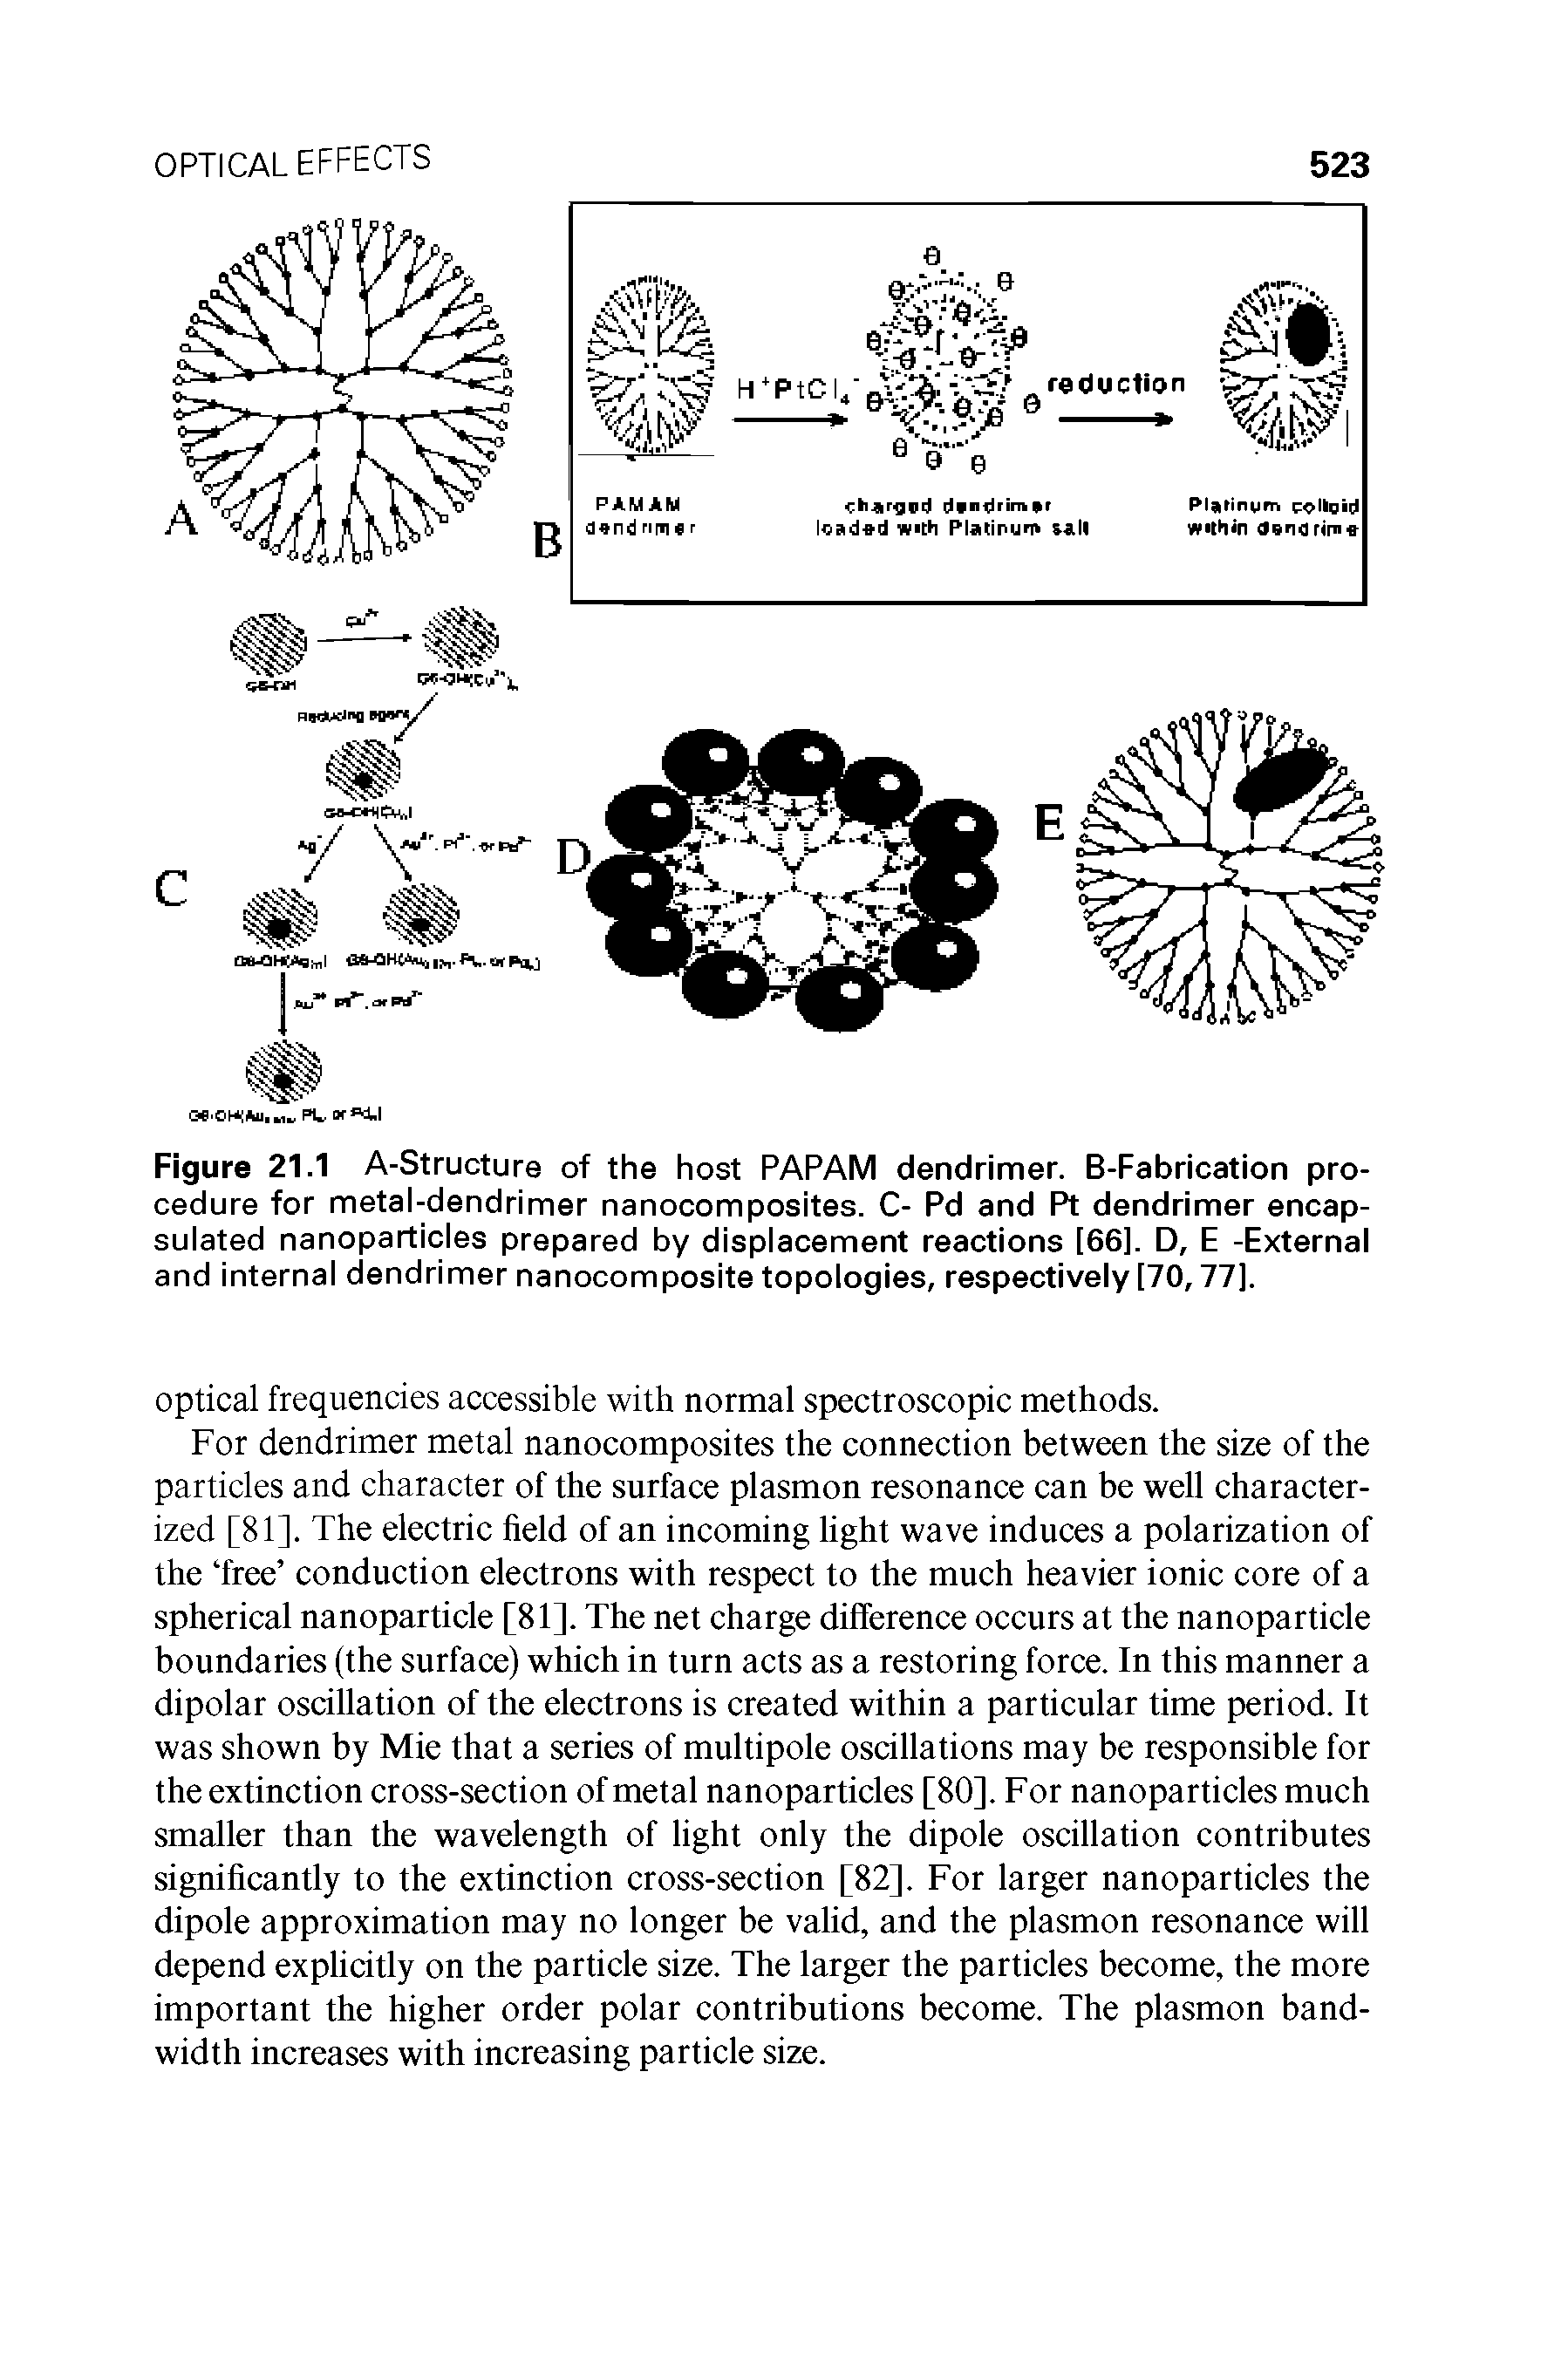 Figure 21.1 A-Structure of the host PAPAM dendrimer. B-Fabrication procedure for metal-dendrimer nanocomposites. C- Pd and Pt dendrimer encapsulated nanoparticles prepared by displacement reactions [66]. D, E -External and internal dendrimer nanocomposite topologies, respectively [70,77],...